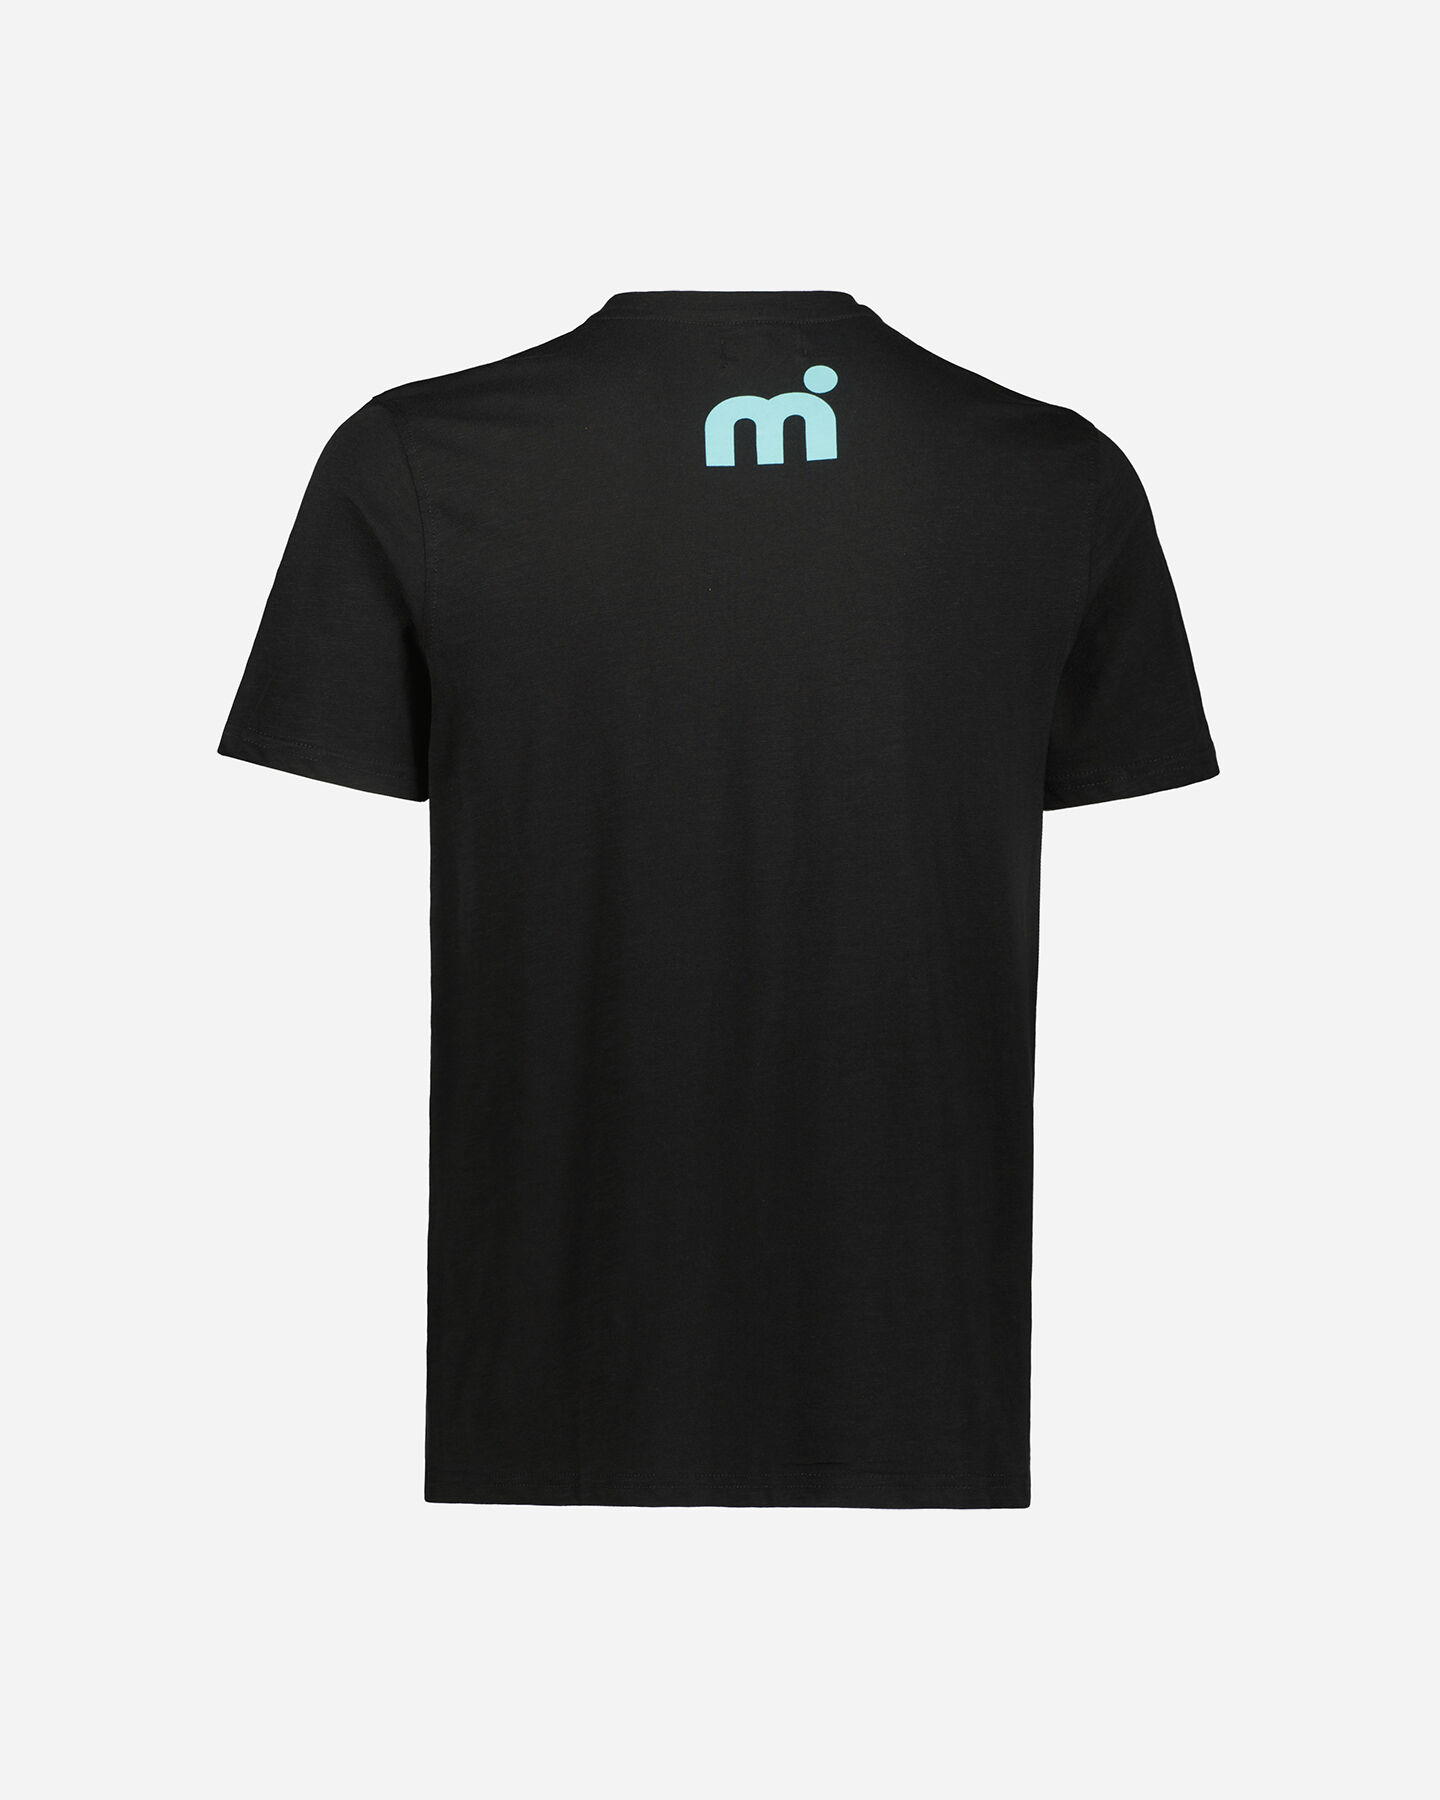  T-Shirt MISTRAL ESSENTIAL M S4121493|050|M scatto 1